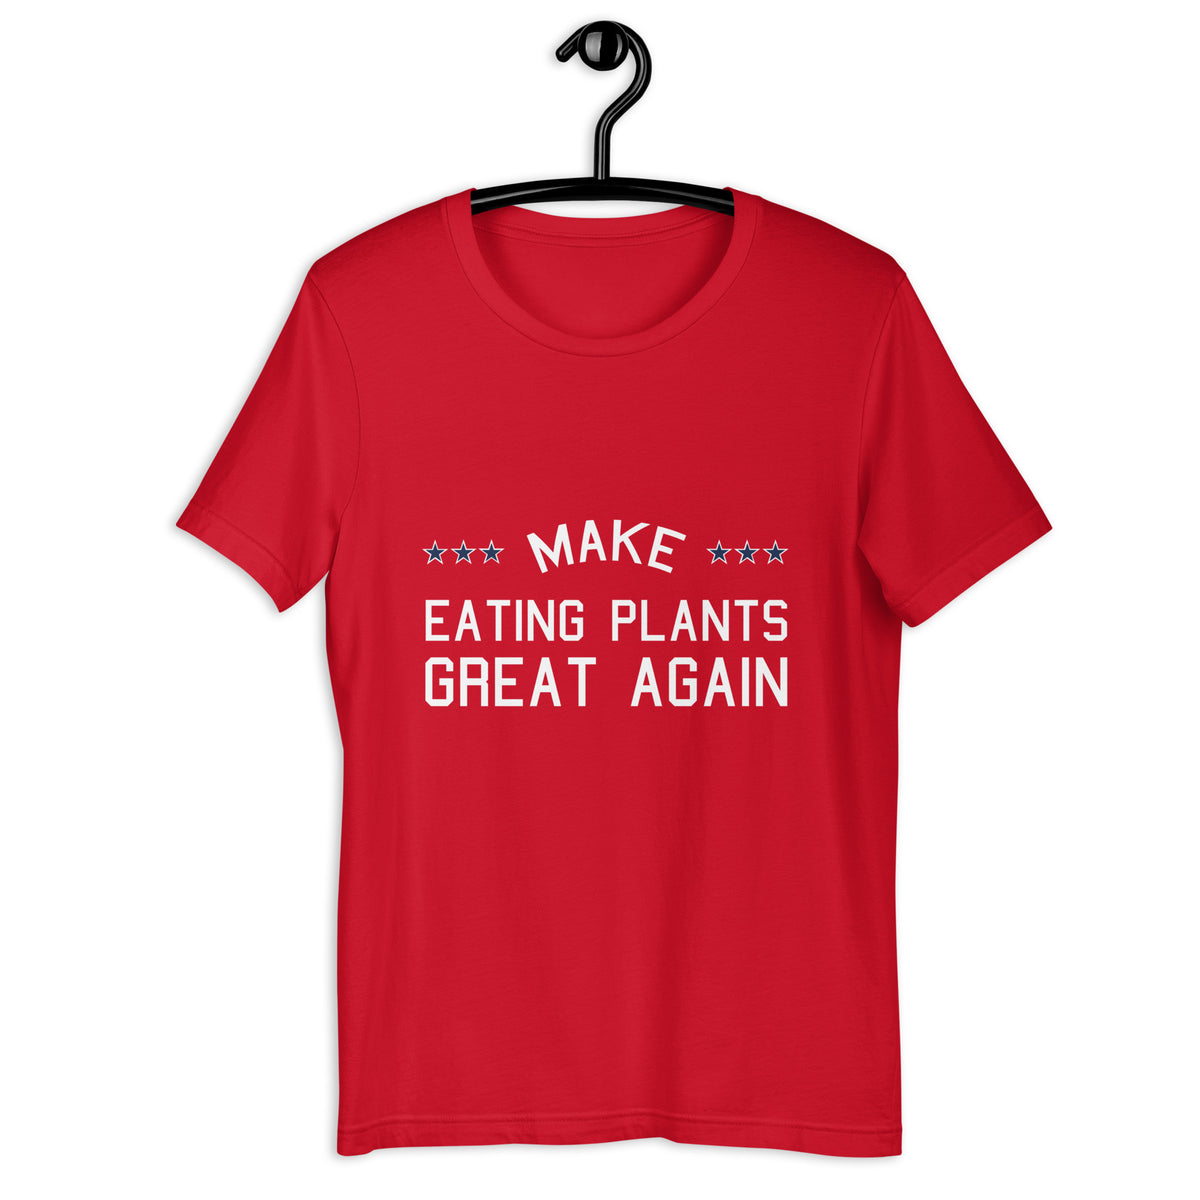 MAKE PLANTS GREAT Colored t-shirt